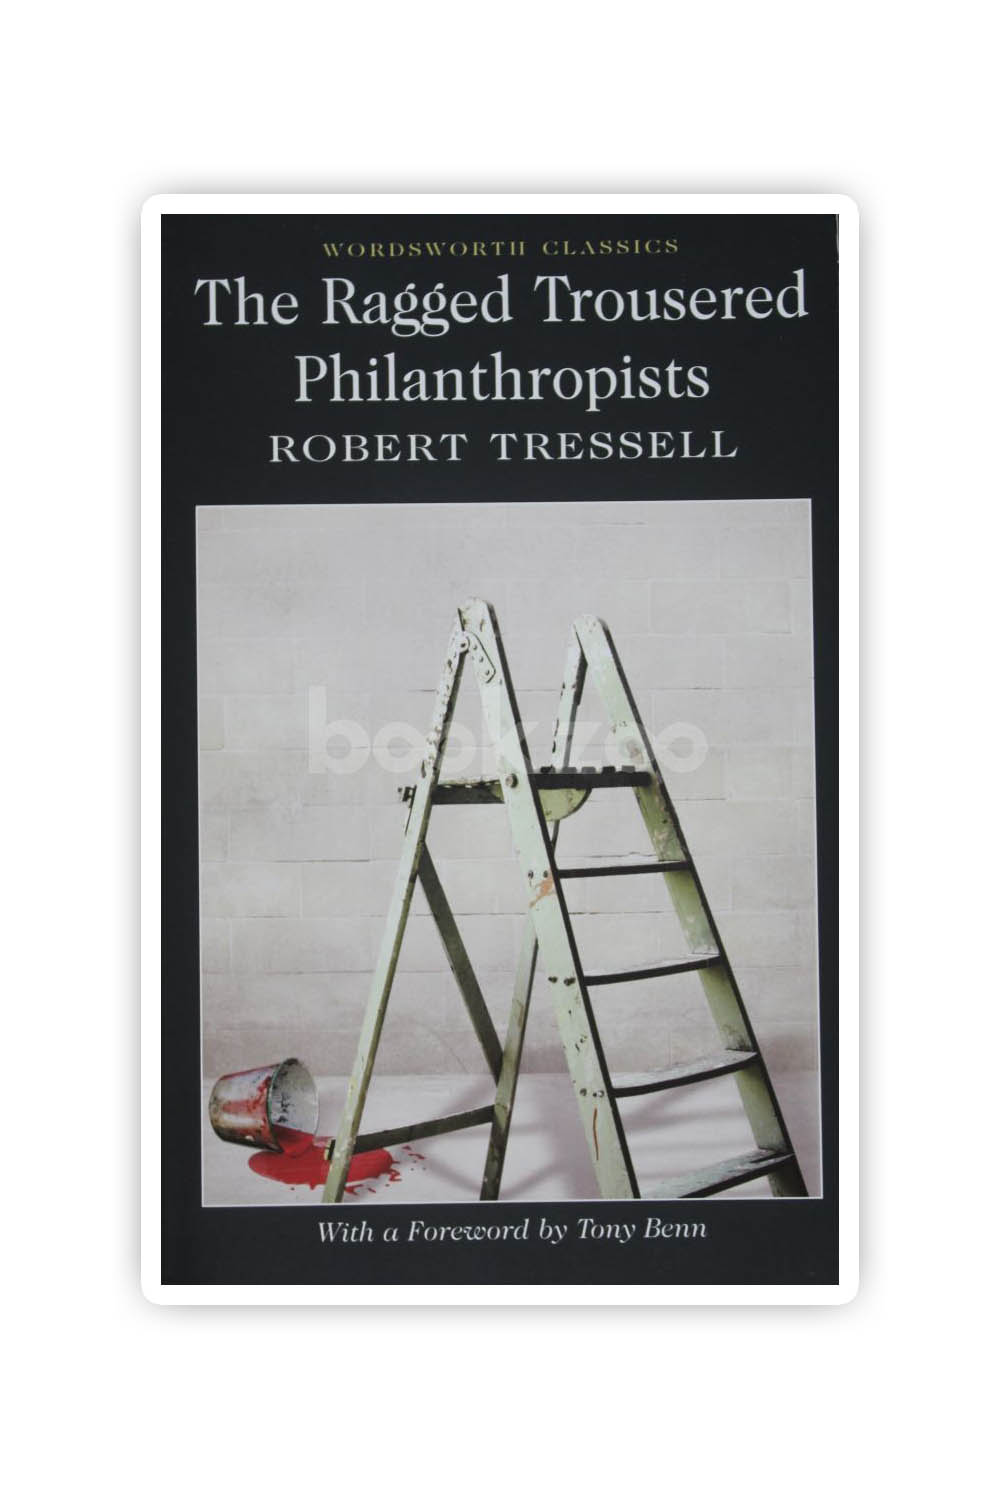 The Ragged Trousered Philanthropists  Feature Film by George Moore   Kickstarter